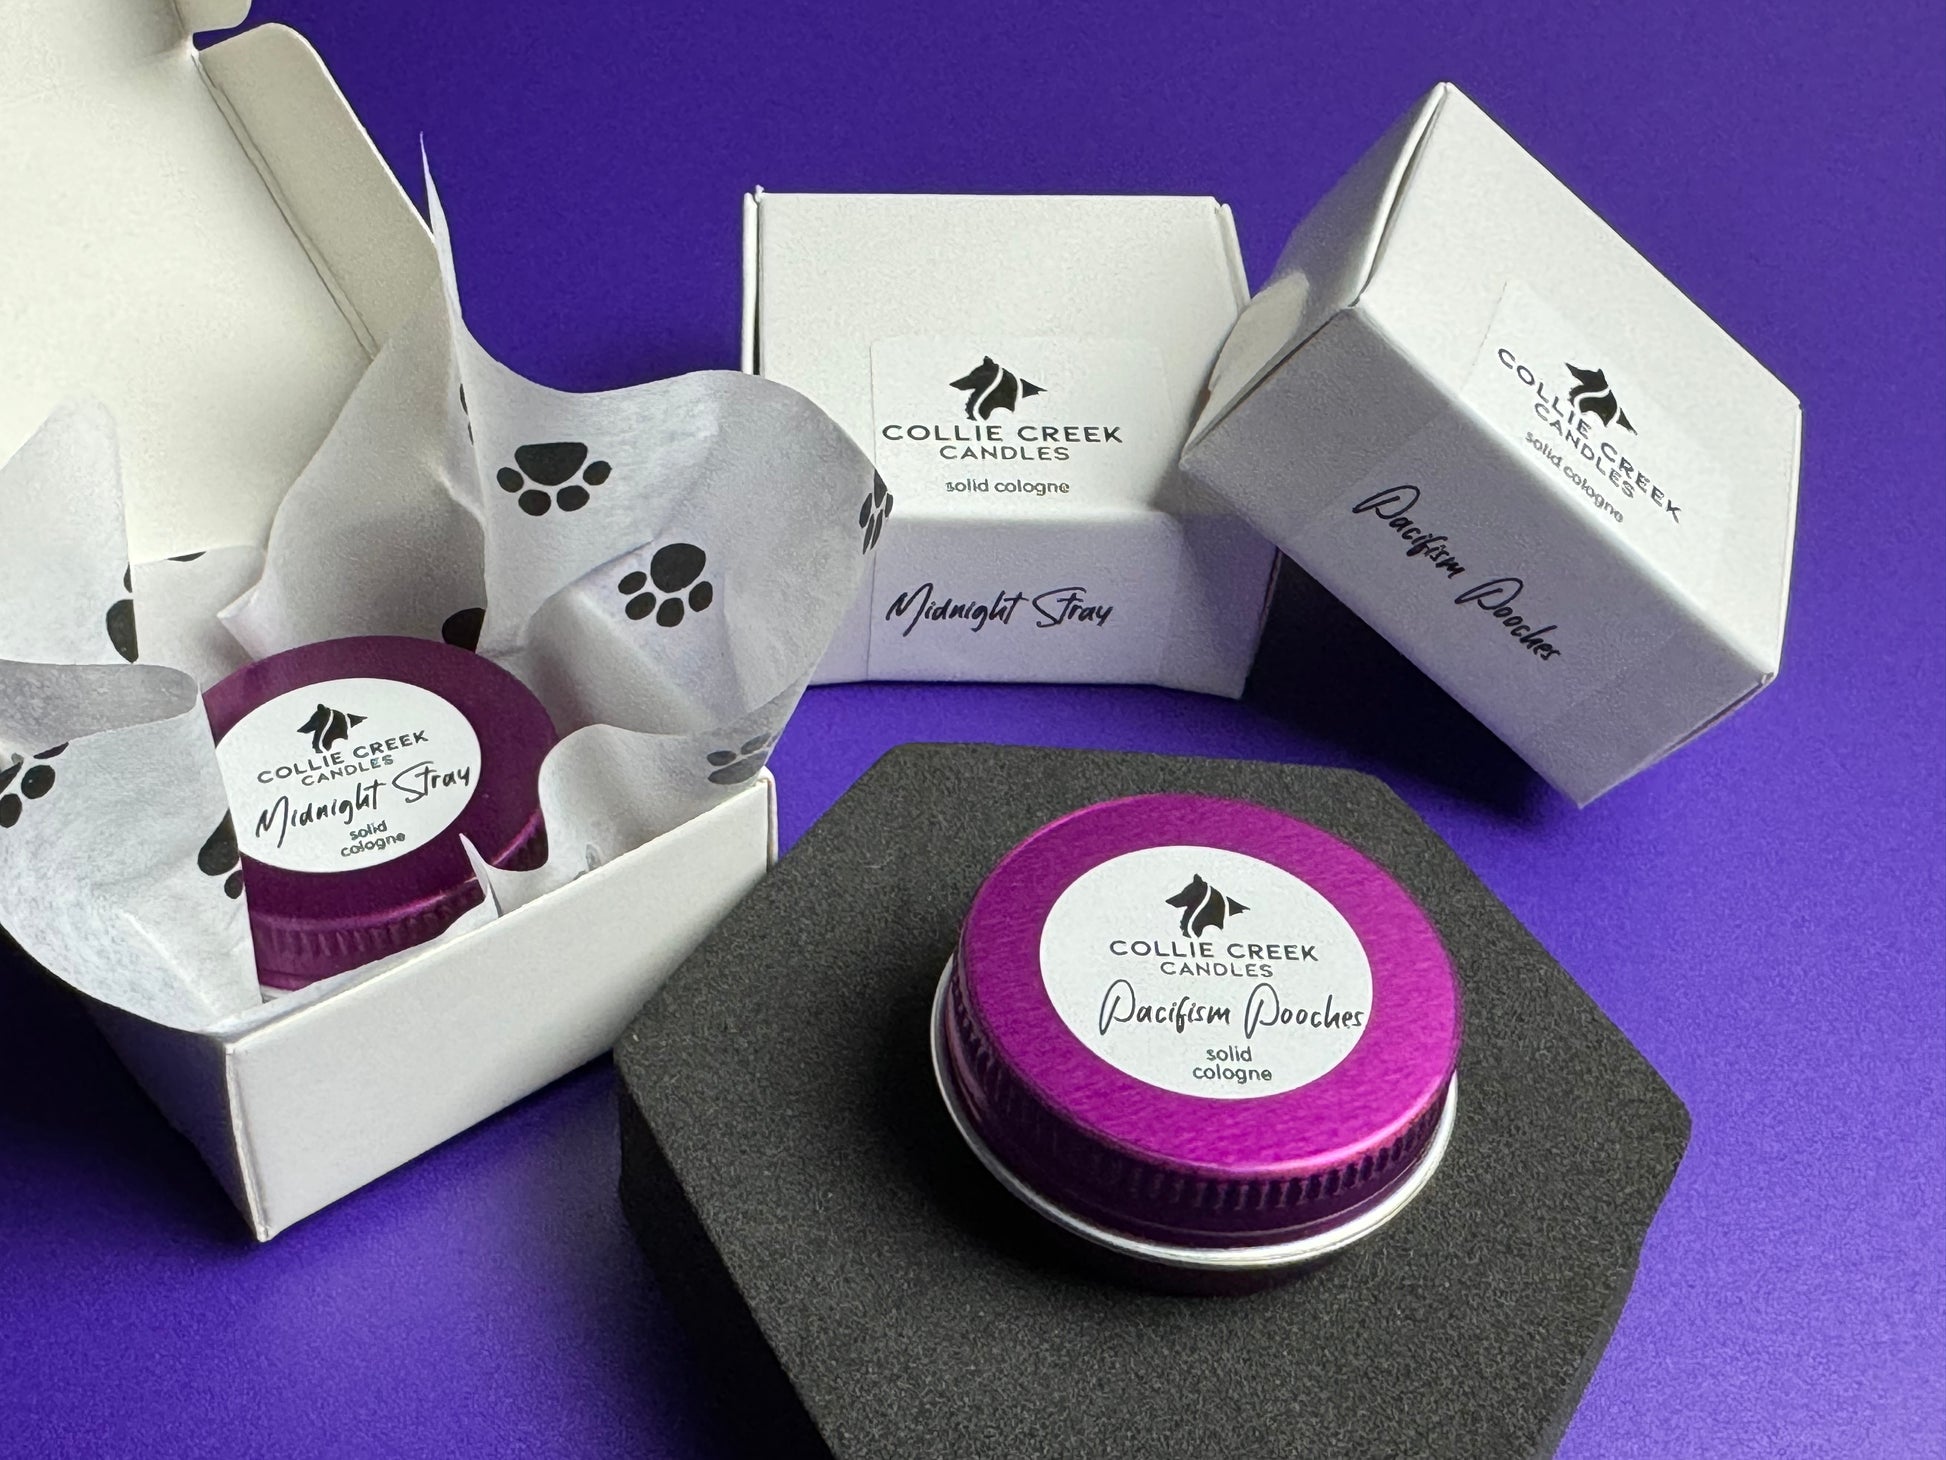 Solid colognes in lavender or patchouli scent in a purple tin and white gift box.